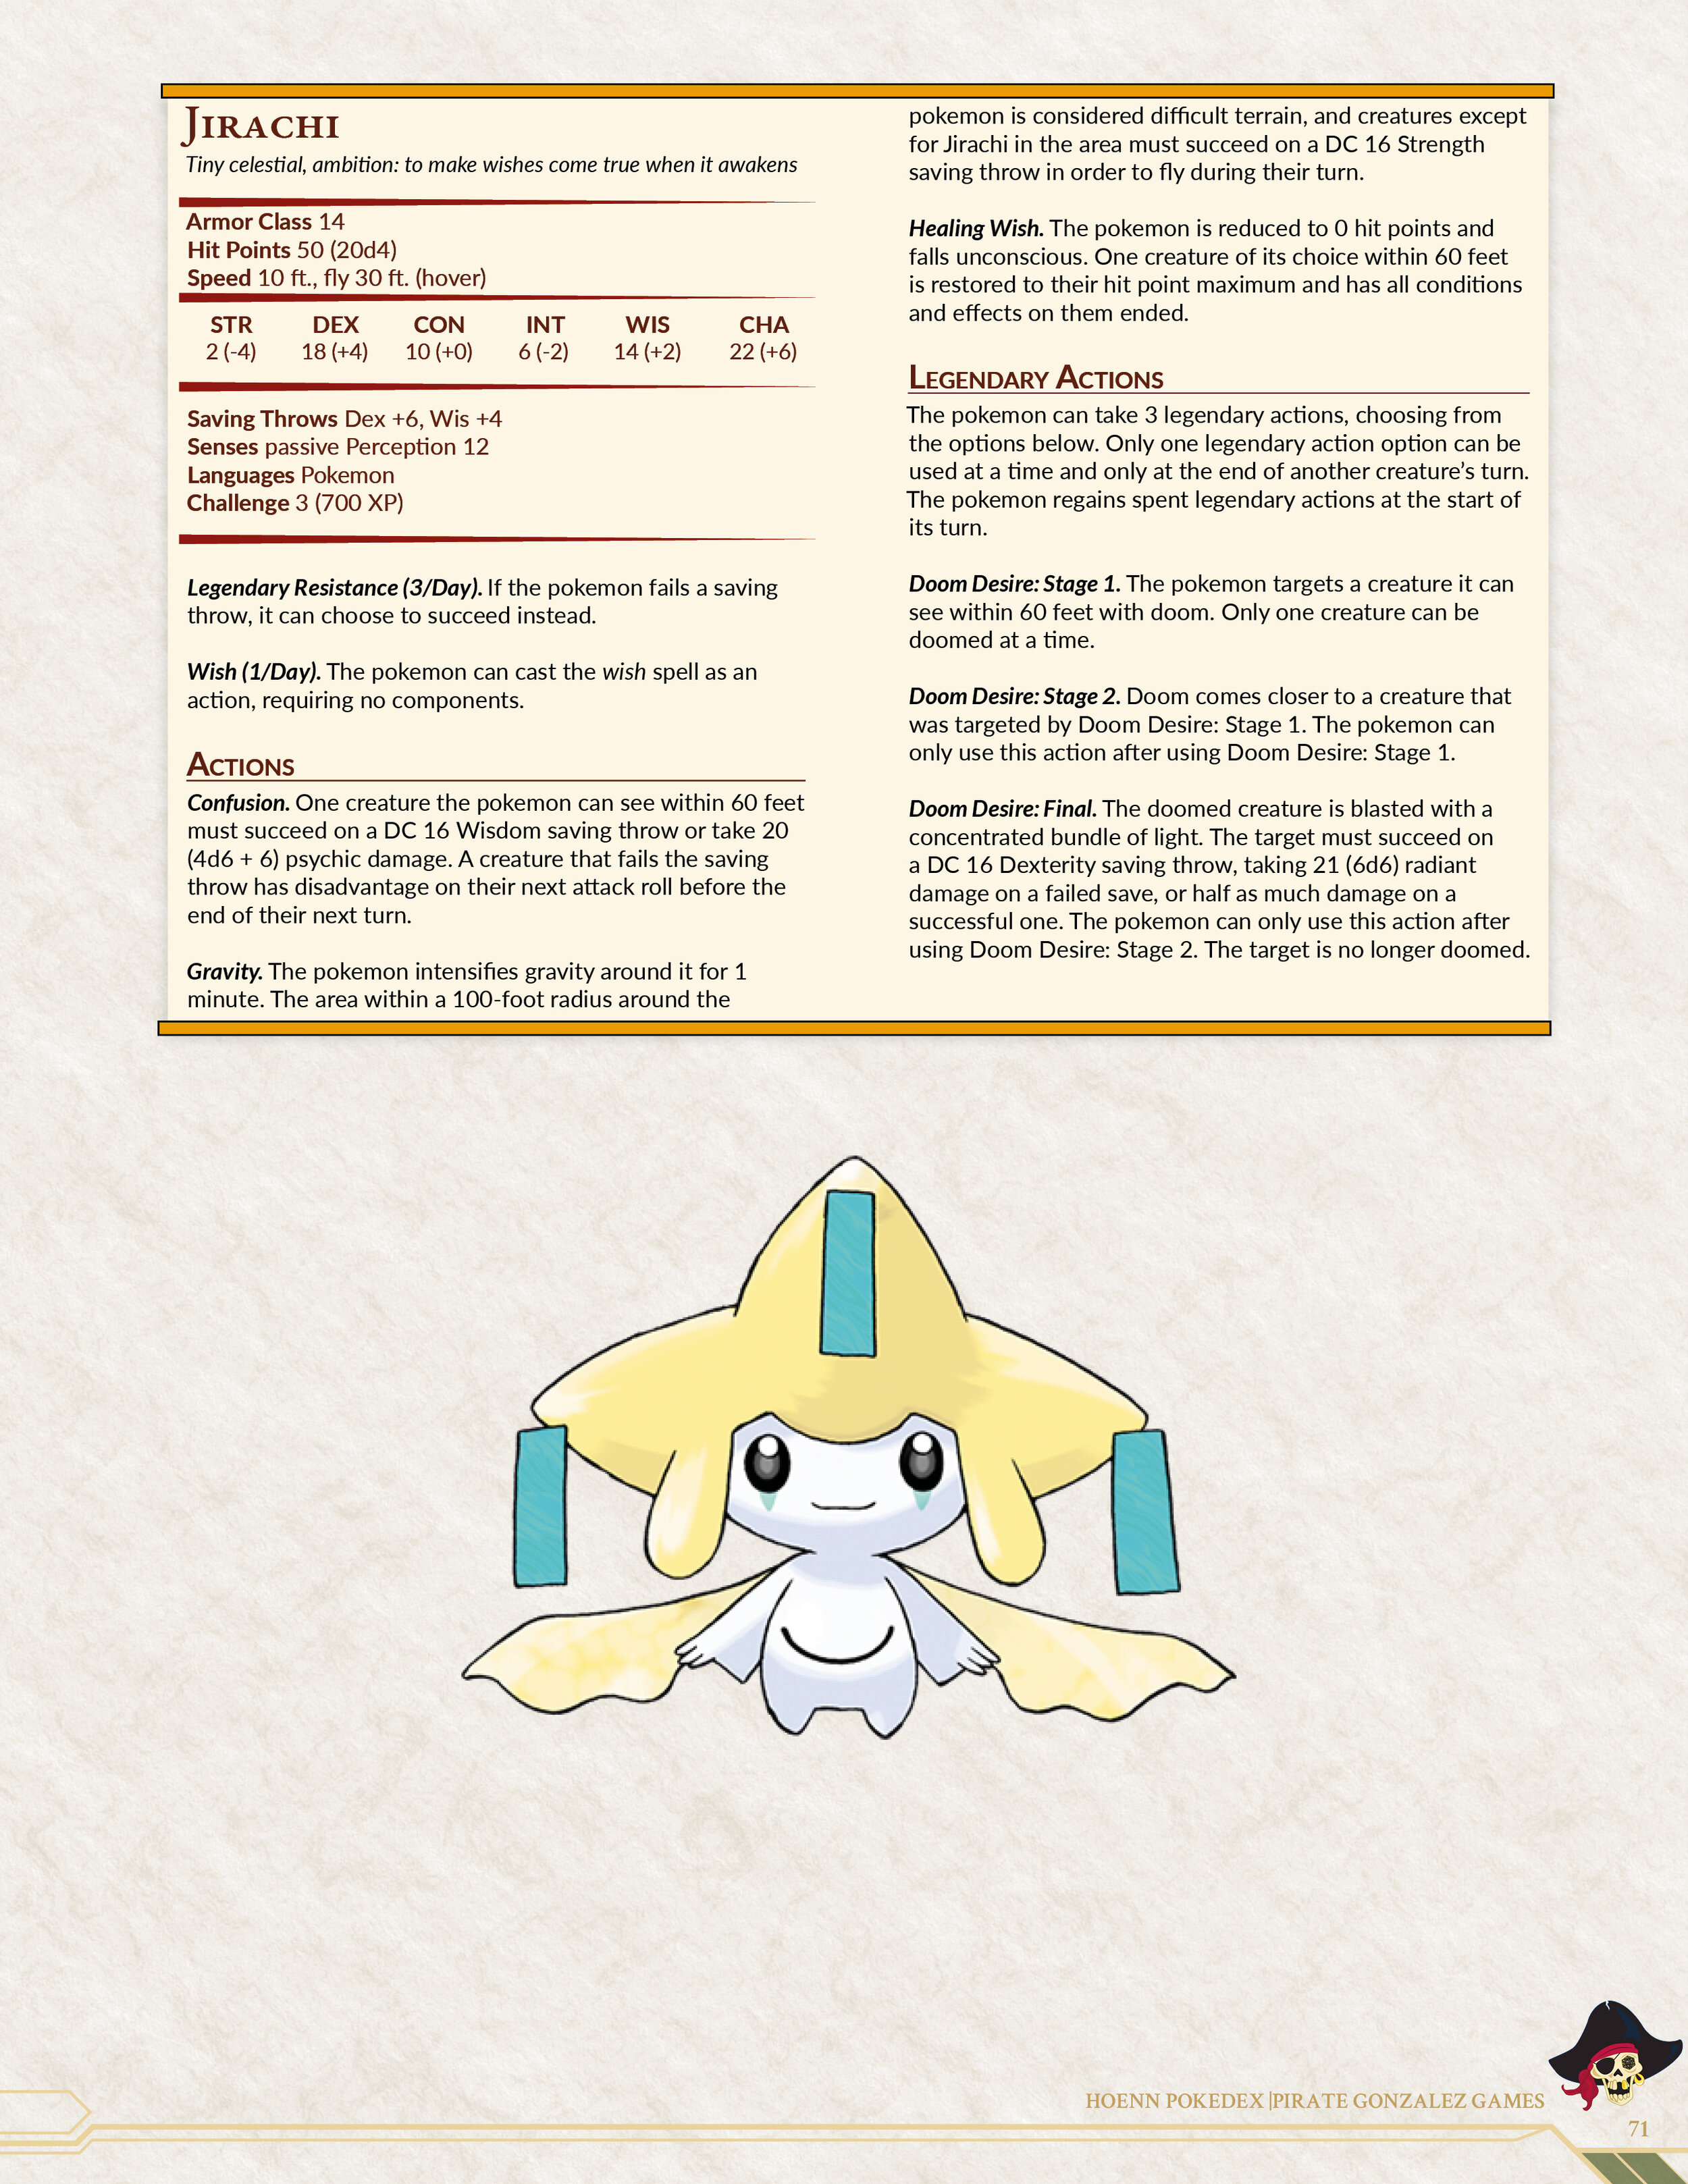 Tim Gonzalez  BEACON RPG on X: It's finally here, the gen 3 Hoenn pokedex  for D&D 5e! Enjoy the full pokedex at my site, including a link to the  combined PDF!